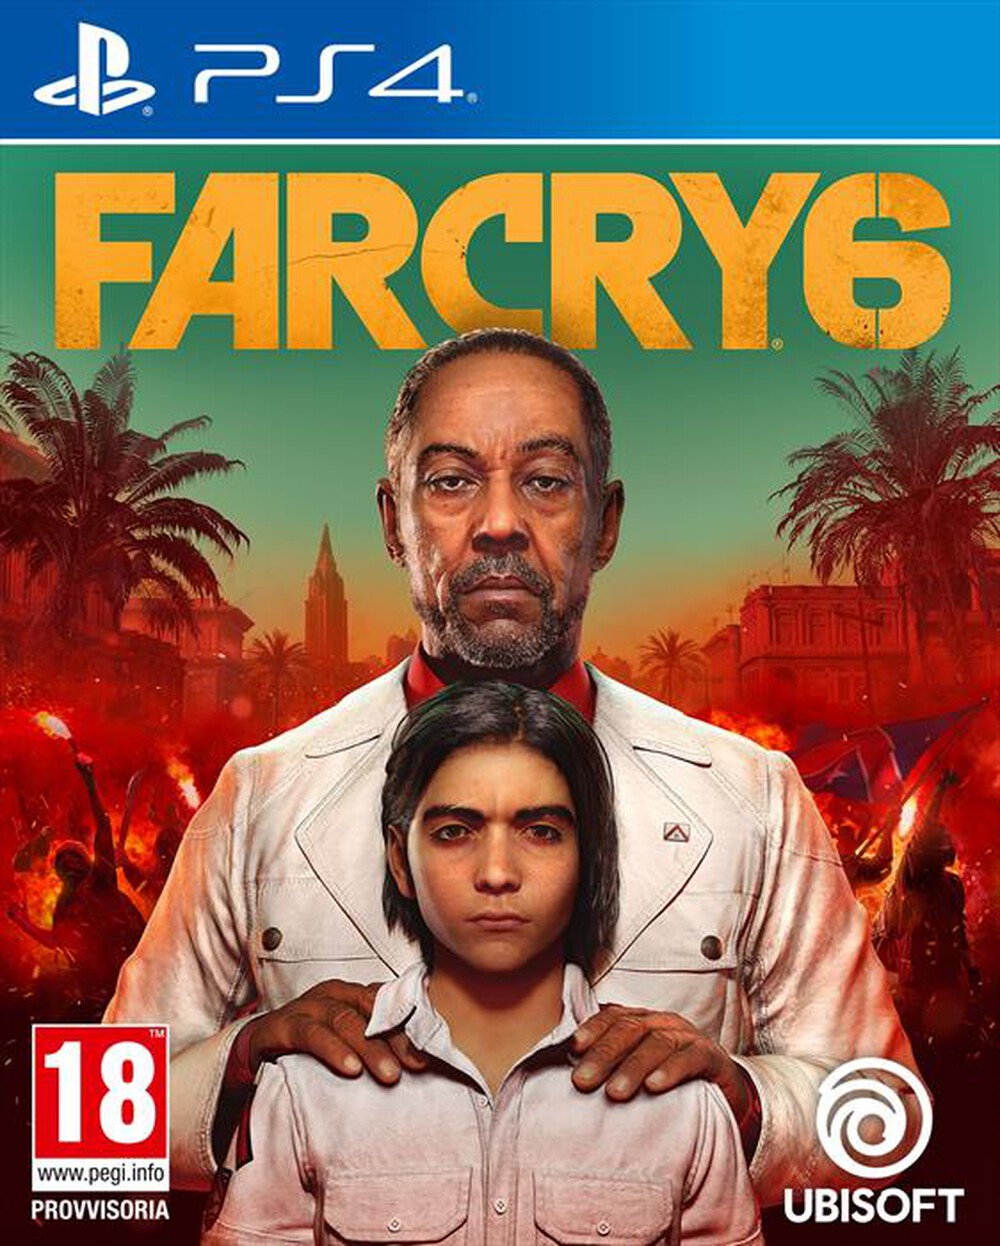 "UBISOFT - FAR CRY 6 PS4"